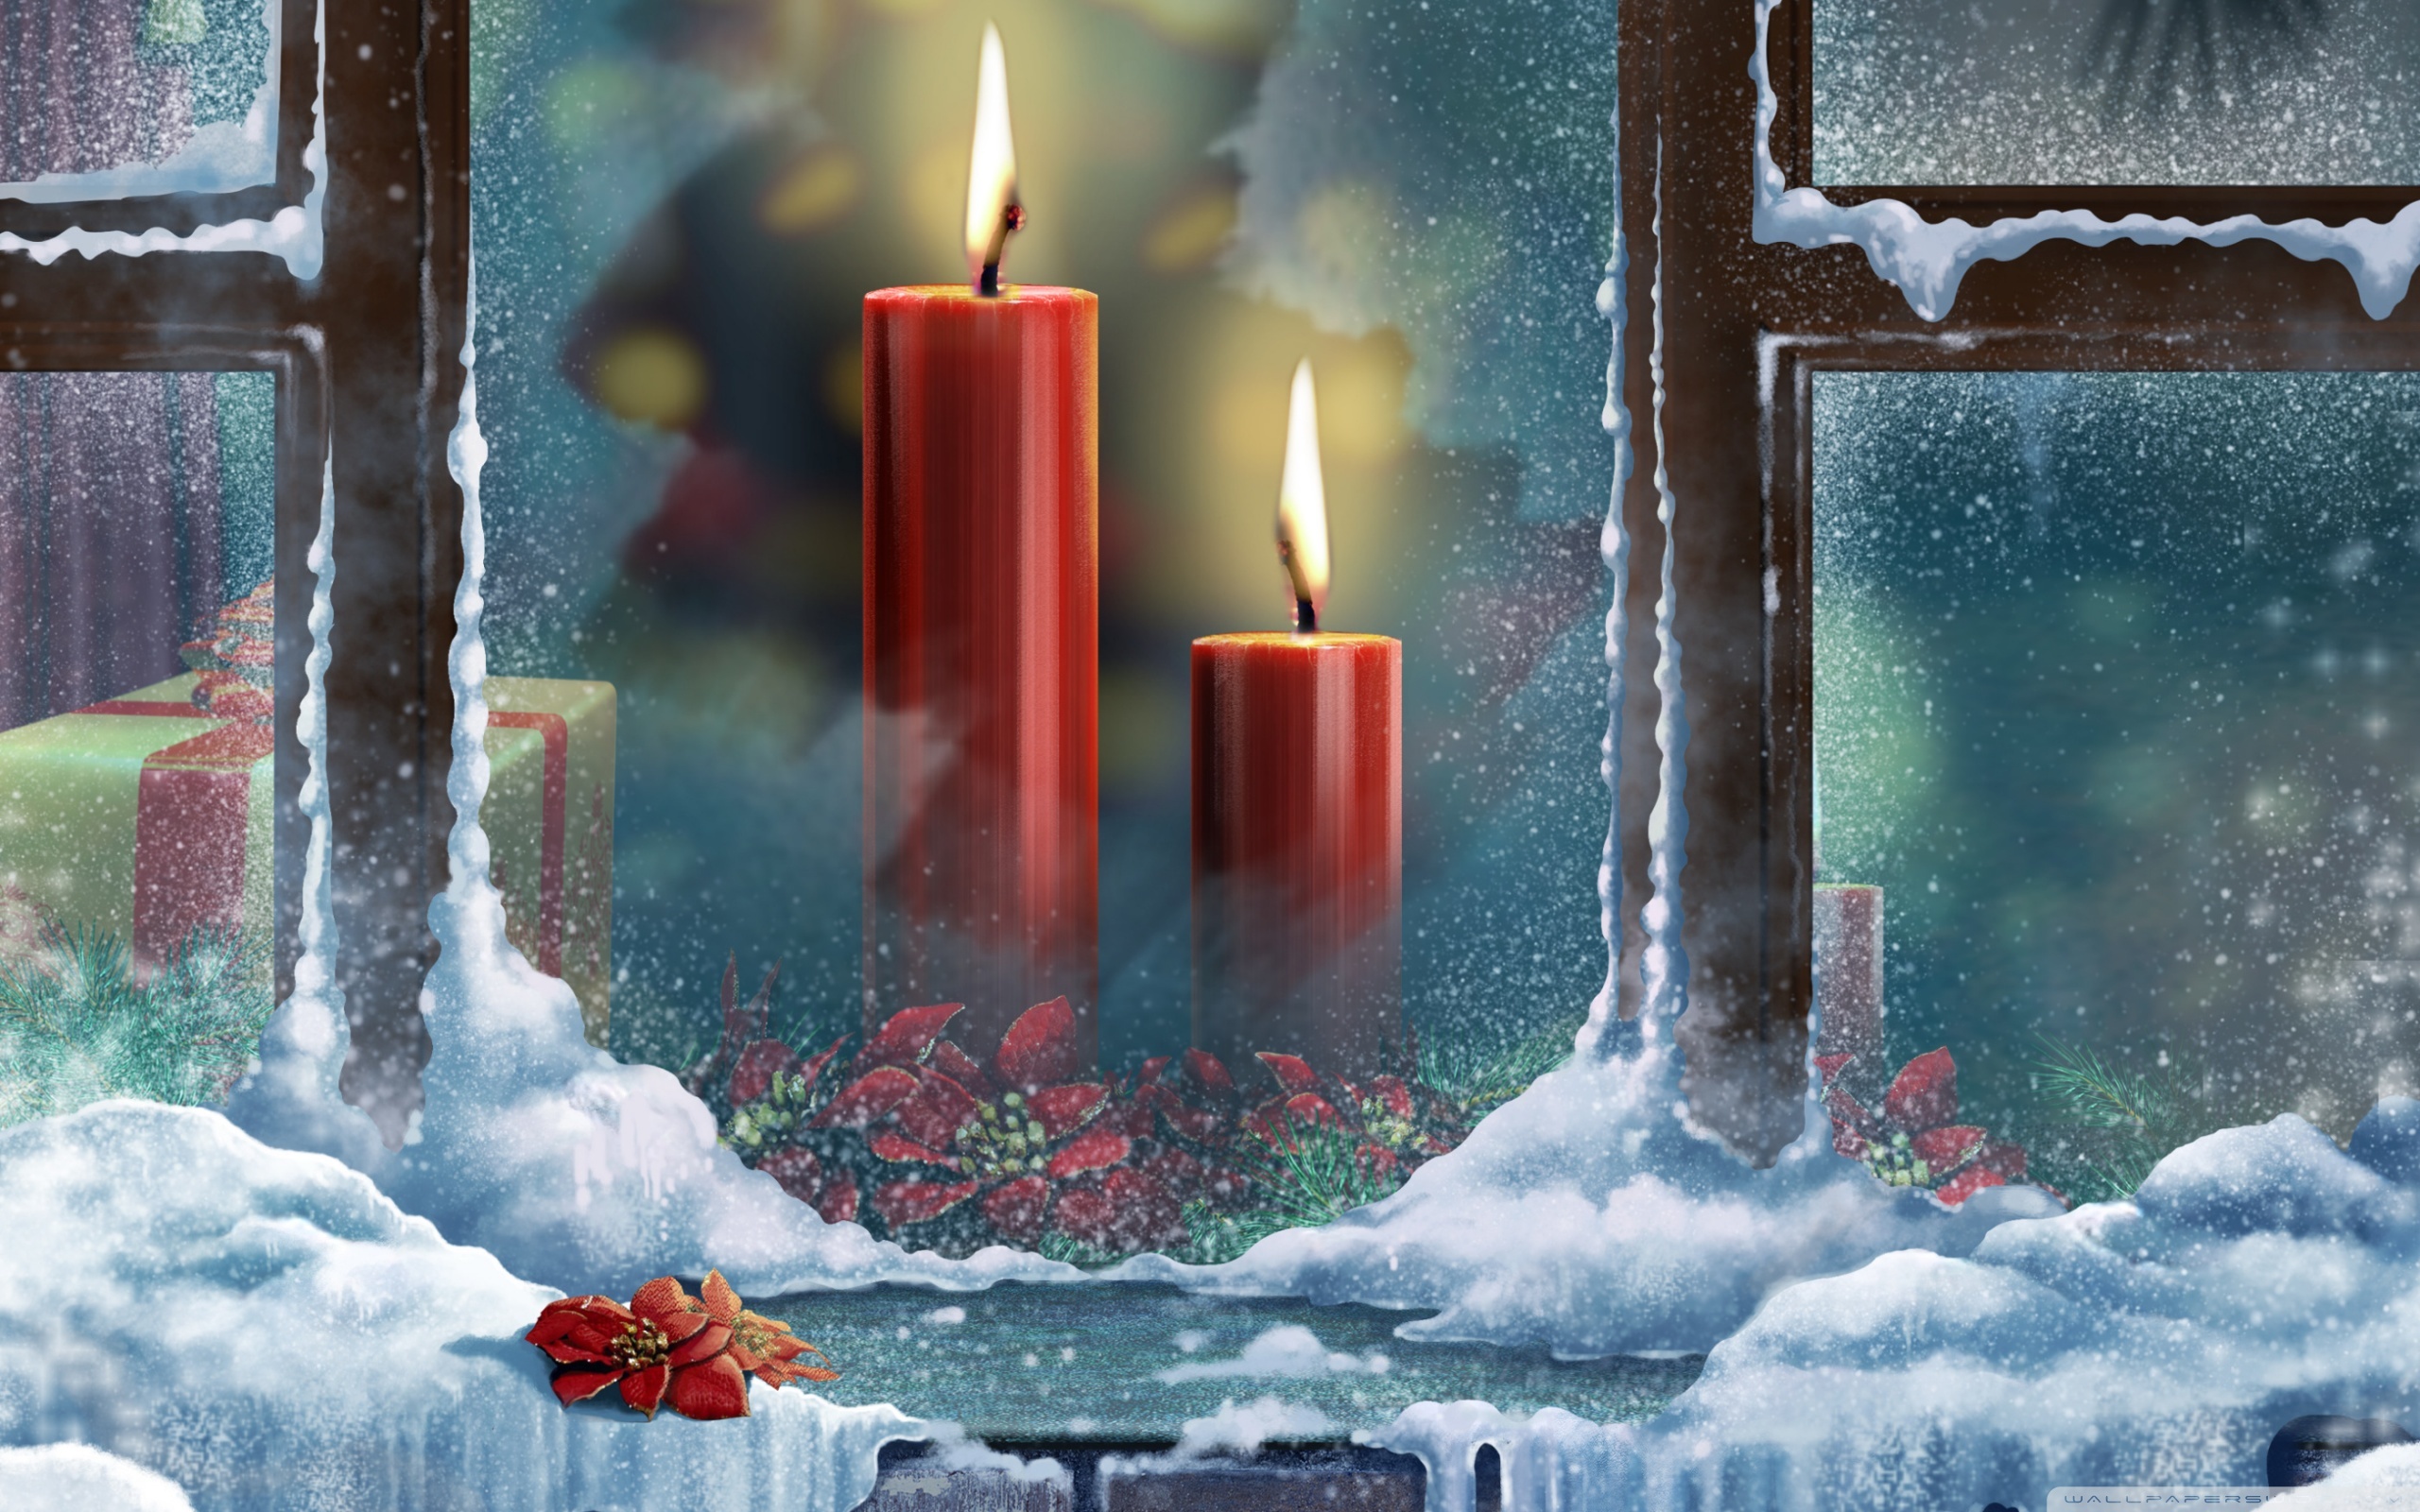 Desktop Backgrounds Christmas, Xmas holidays, candles, new year, pictures